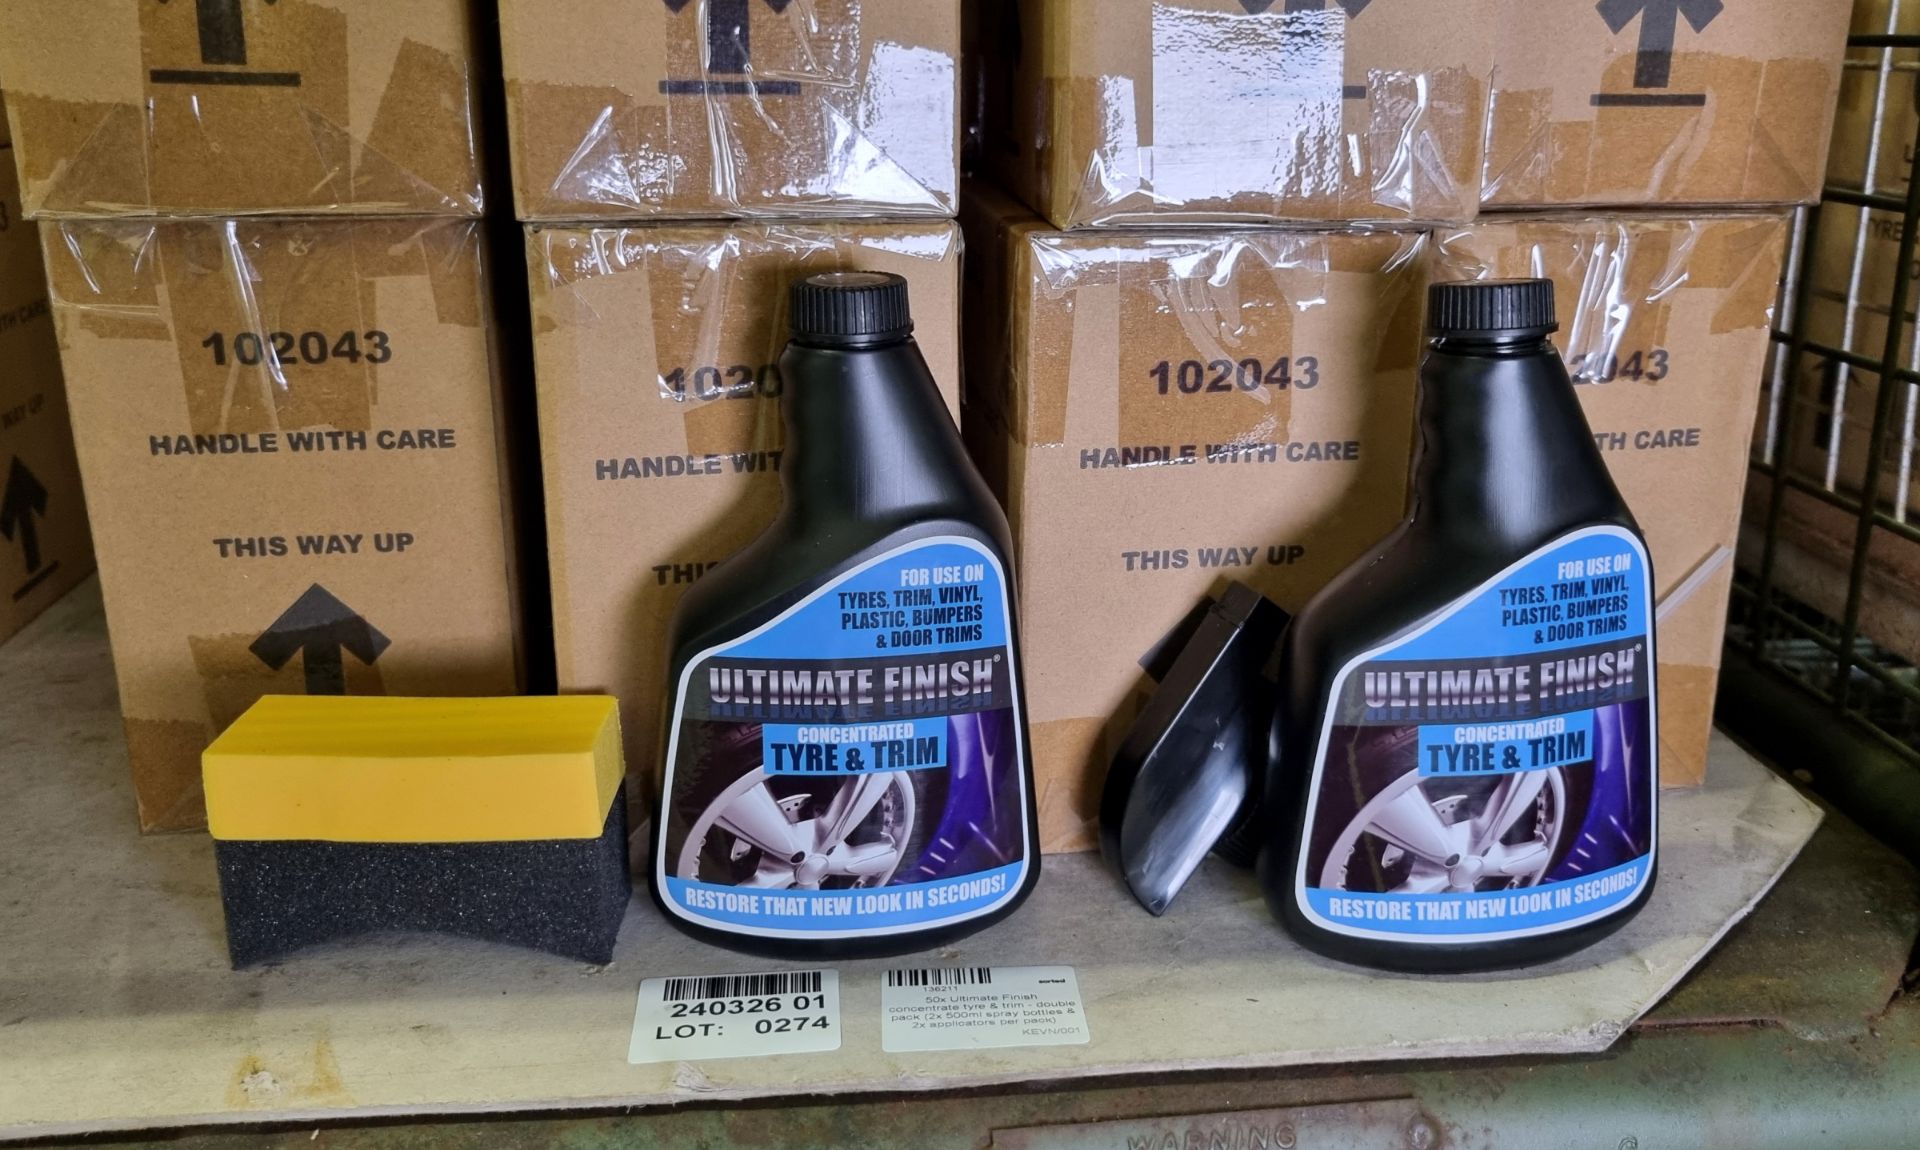 50x Ultimate Finish concentrate tyre & trim - double packs - 2x 500ml spray bottles & 2x applicators - Image 2 of 5